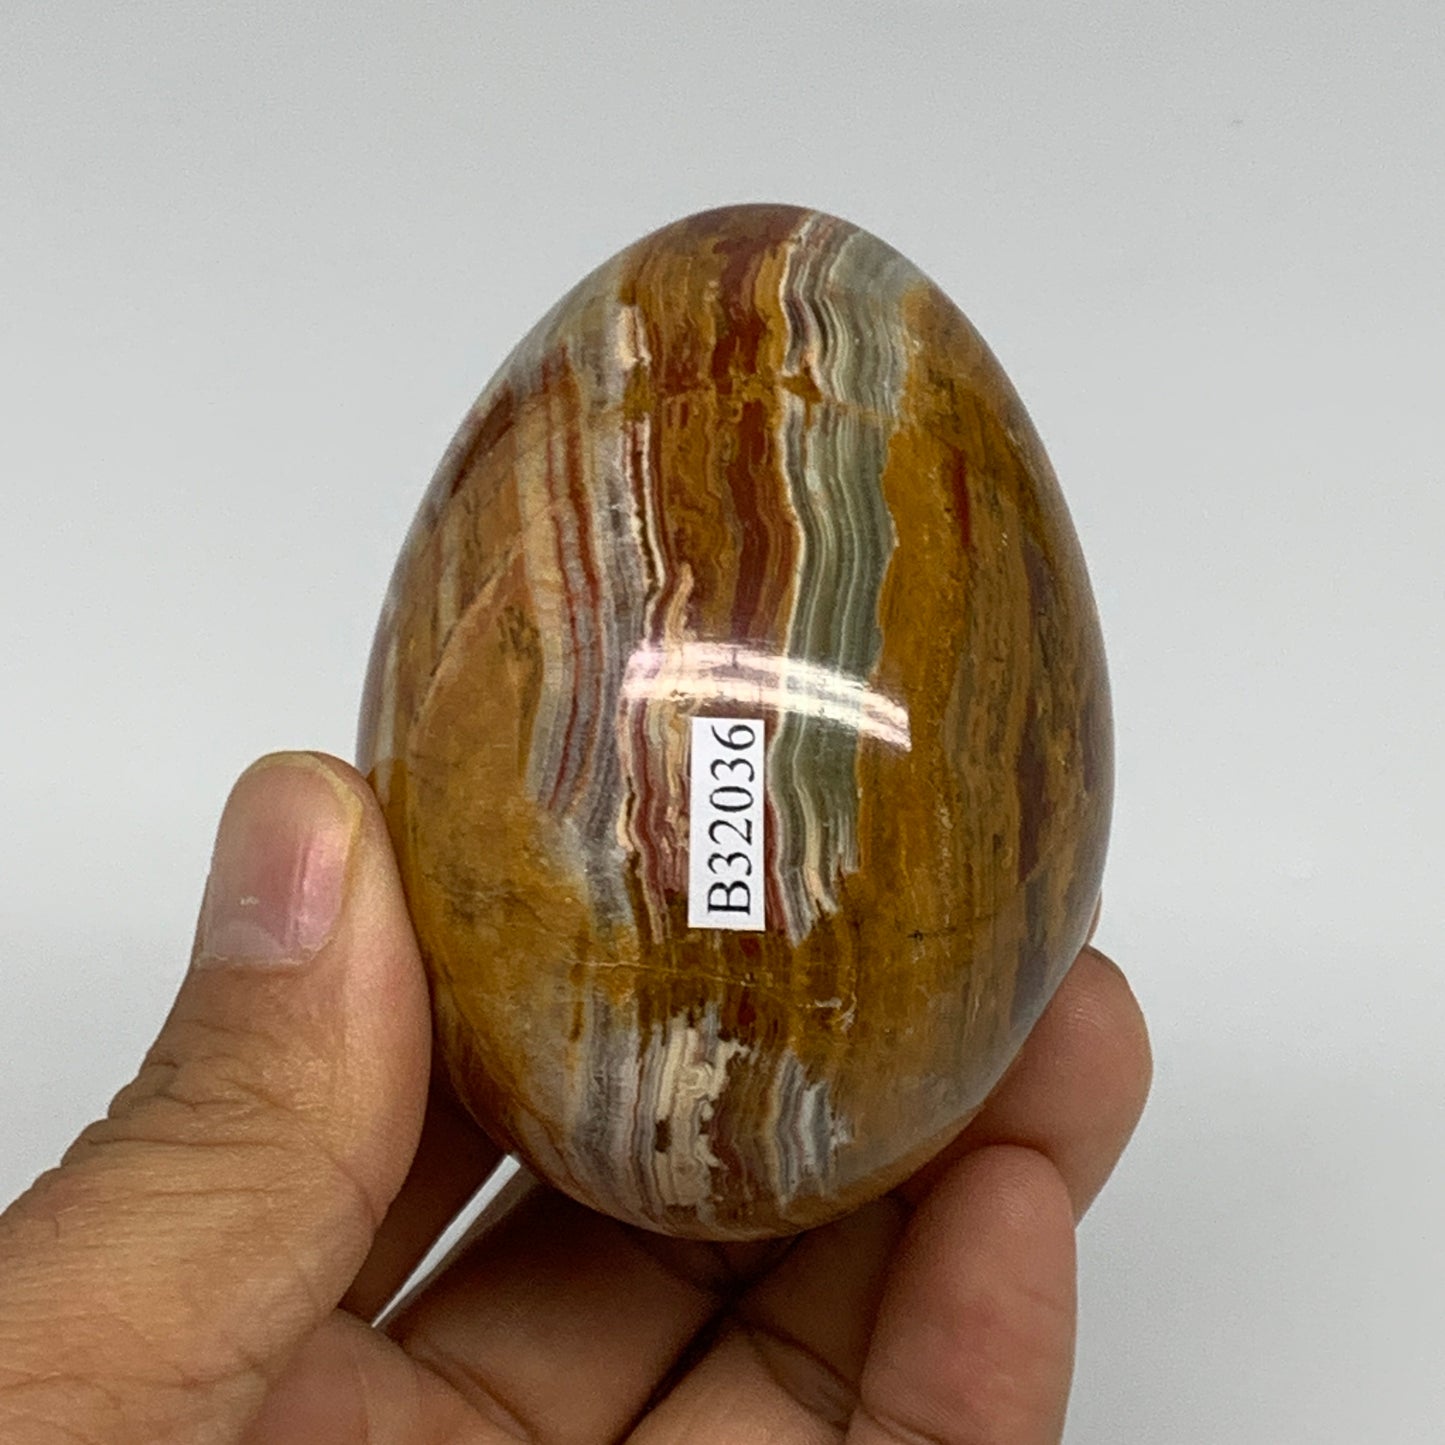 254g, 2.8"x2" Natural Green Onyx Egg Gemstone Mineral, from Pakistan, B32036